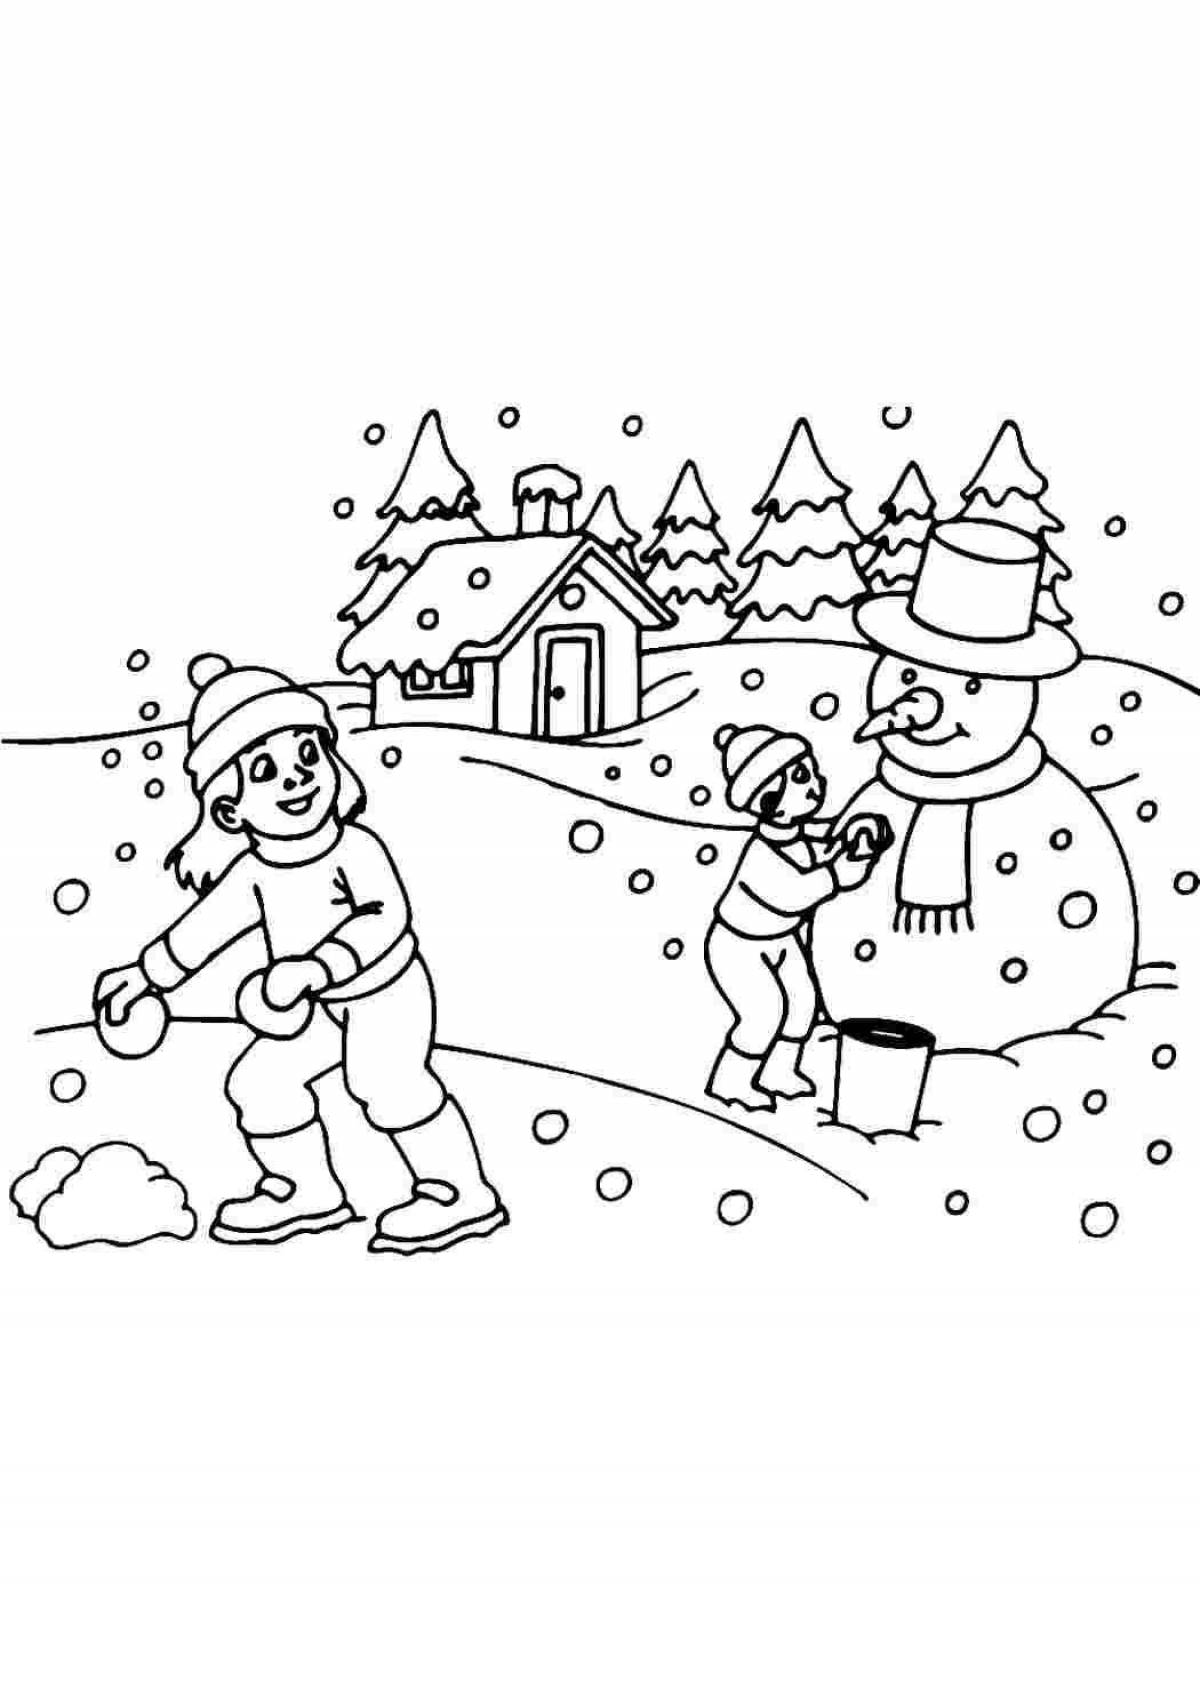 Great january coloring book for 6-7 year olds